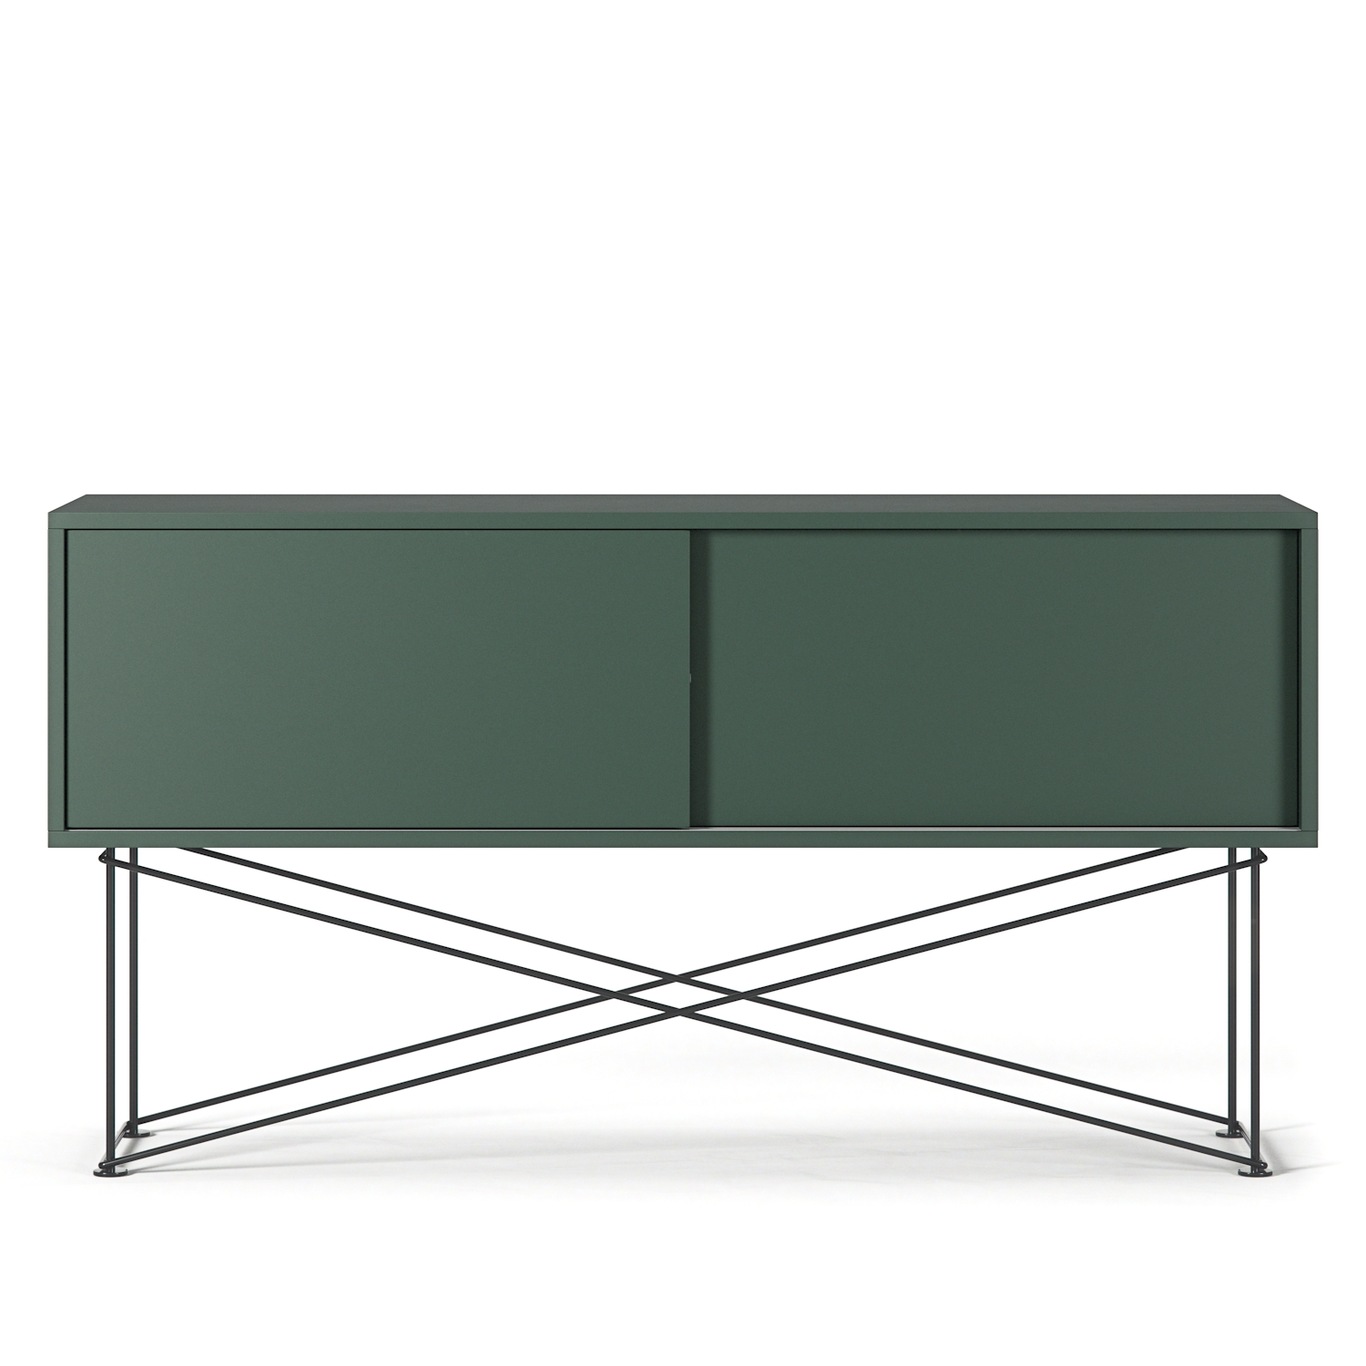 Vogue Media Bench With Stand 136 cm, Green / Black